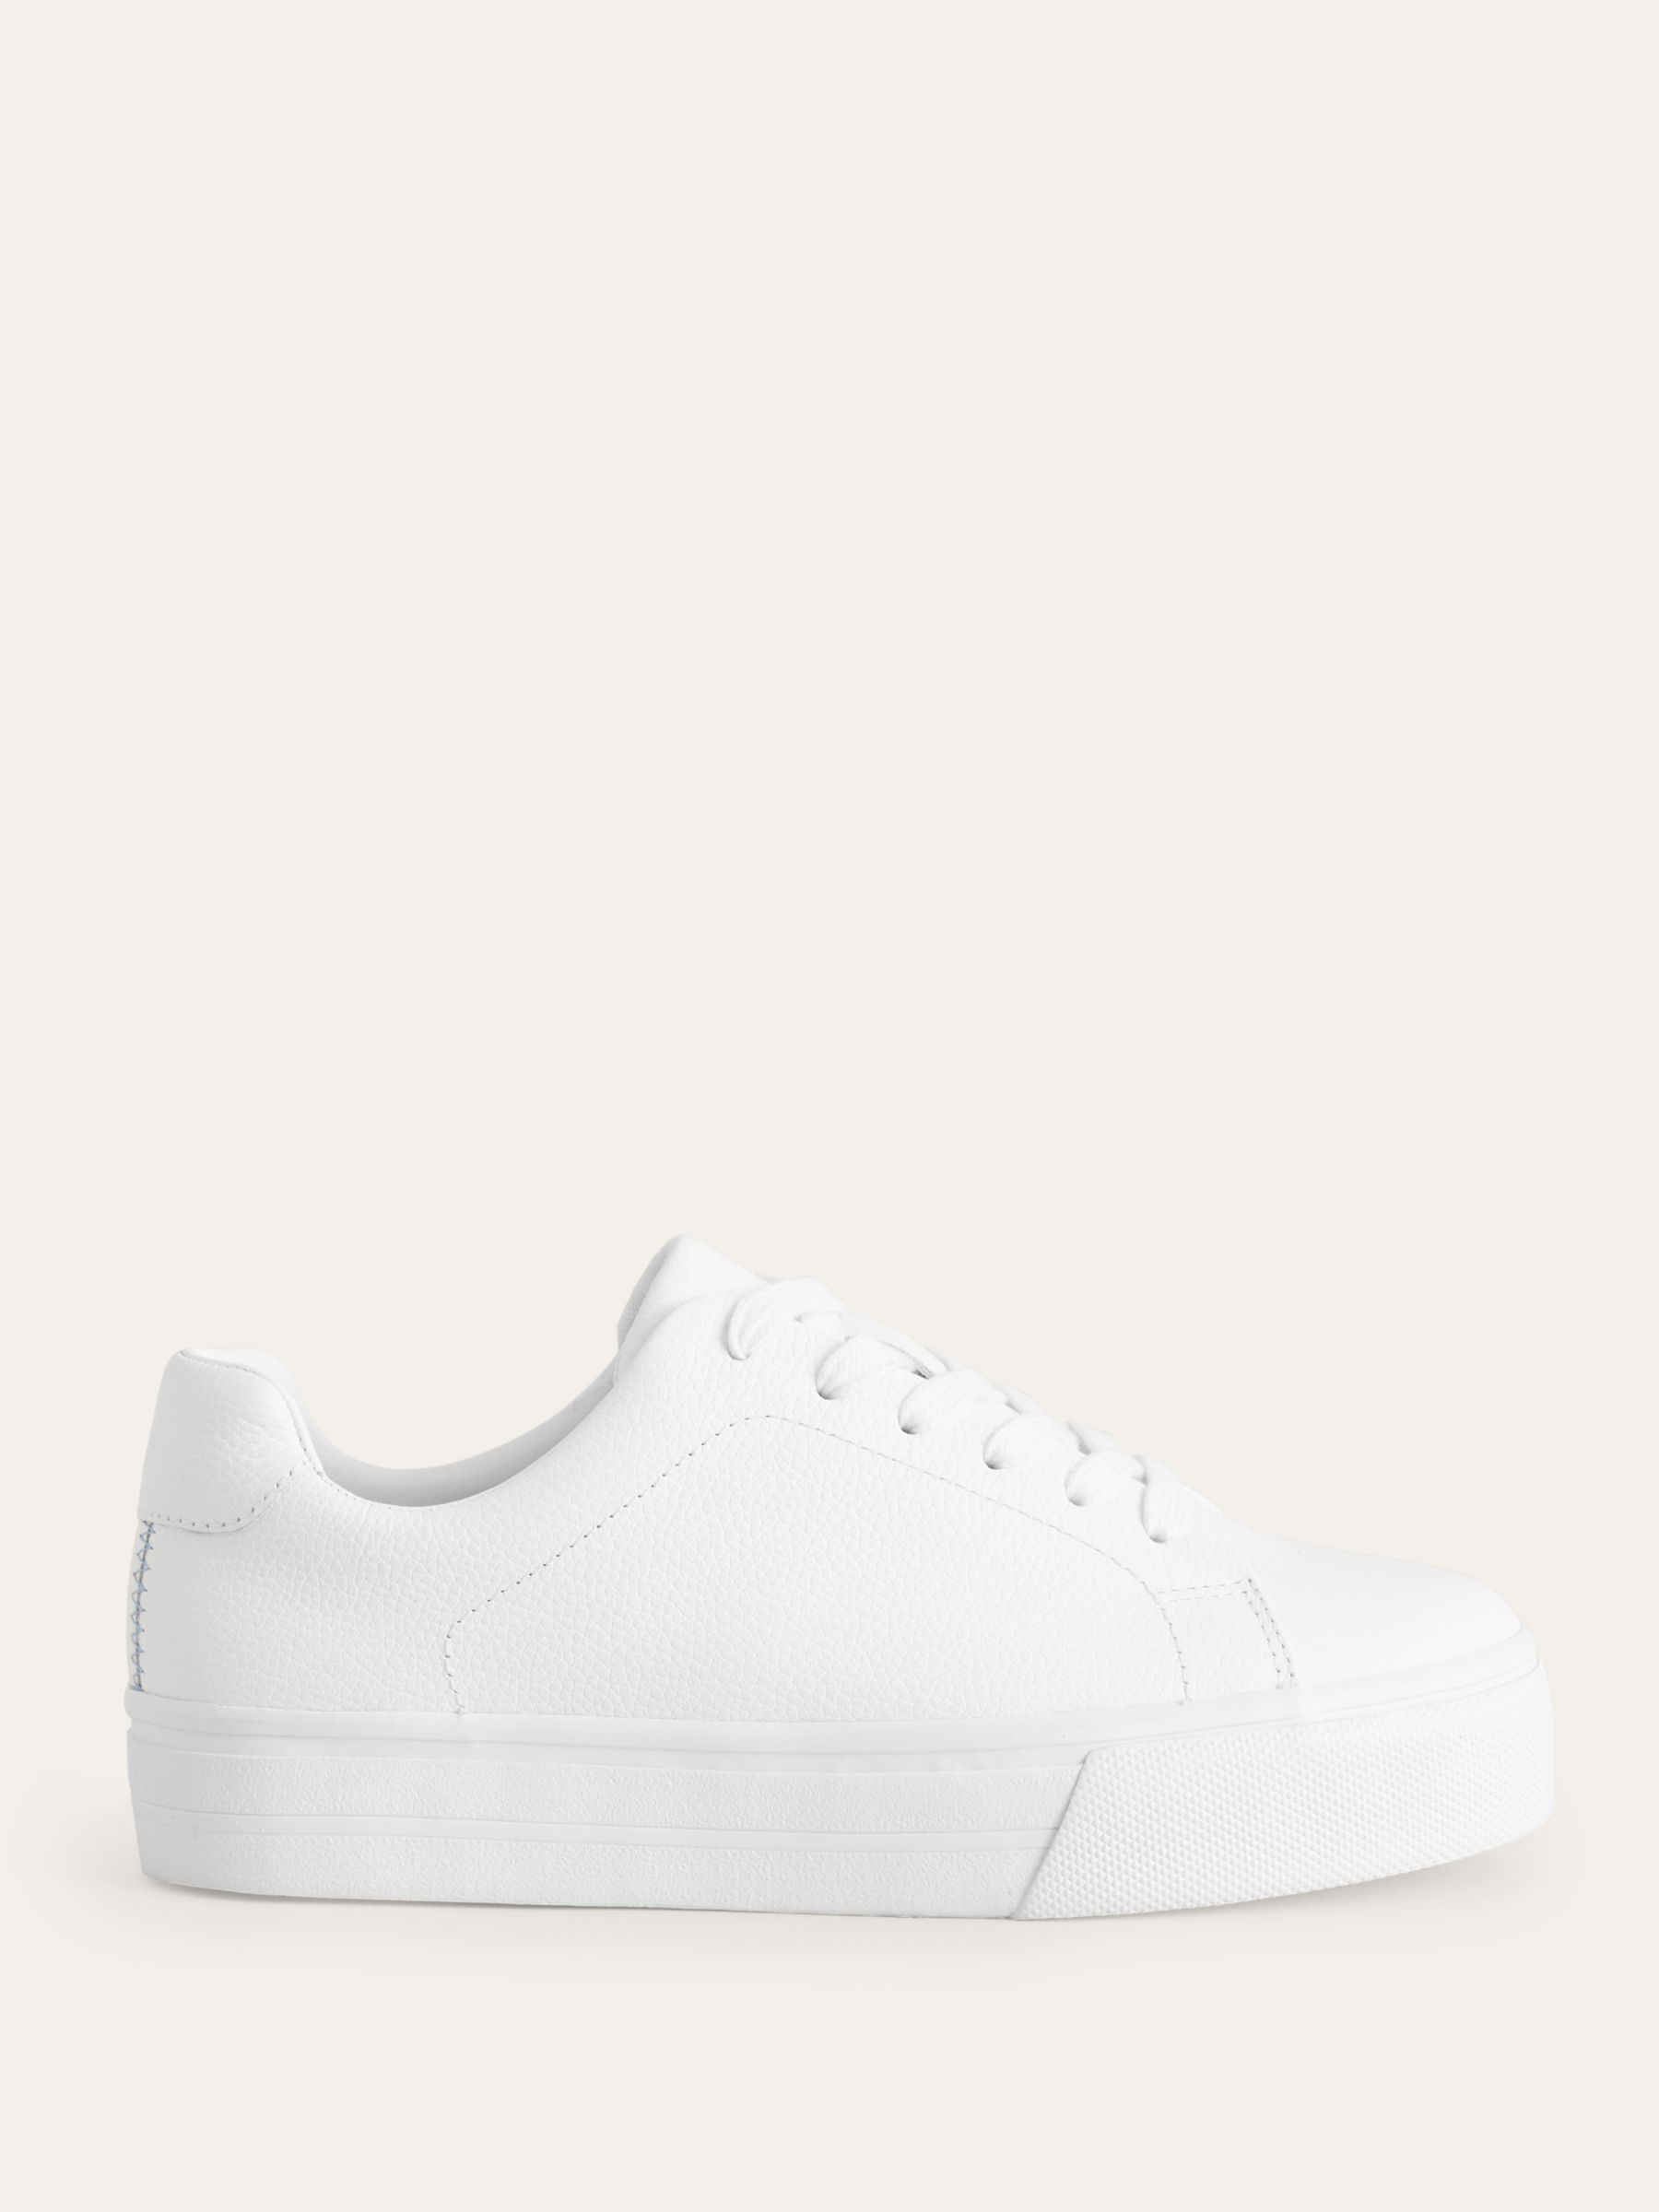 Boden Leather Flatform Trainers, White